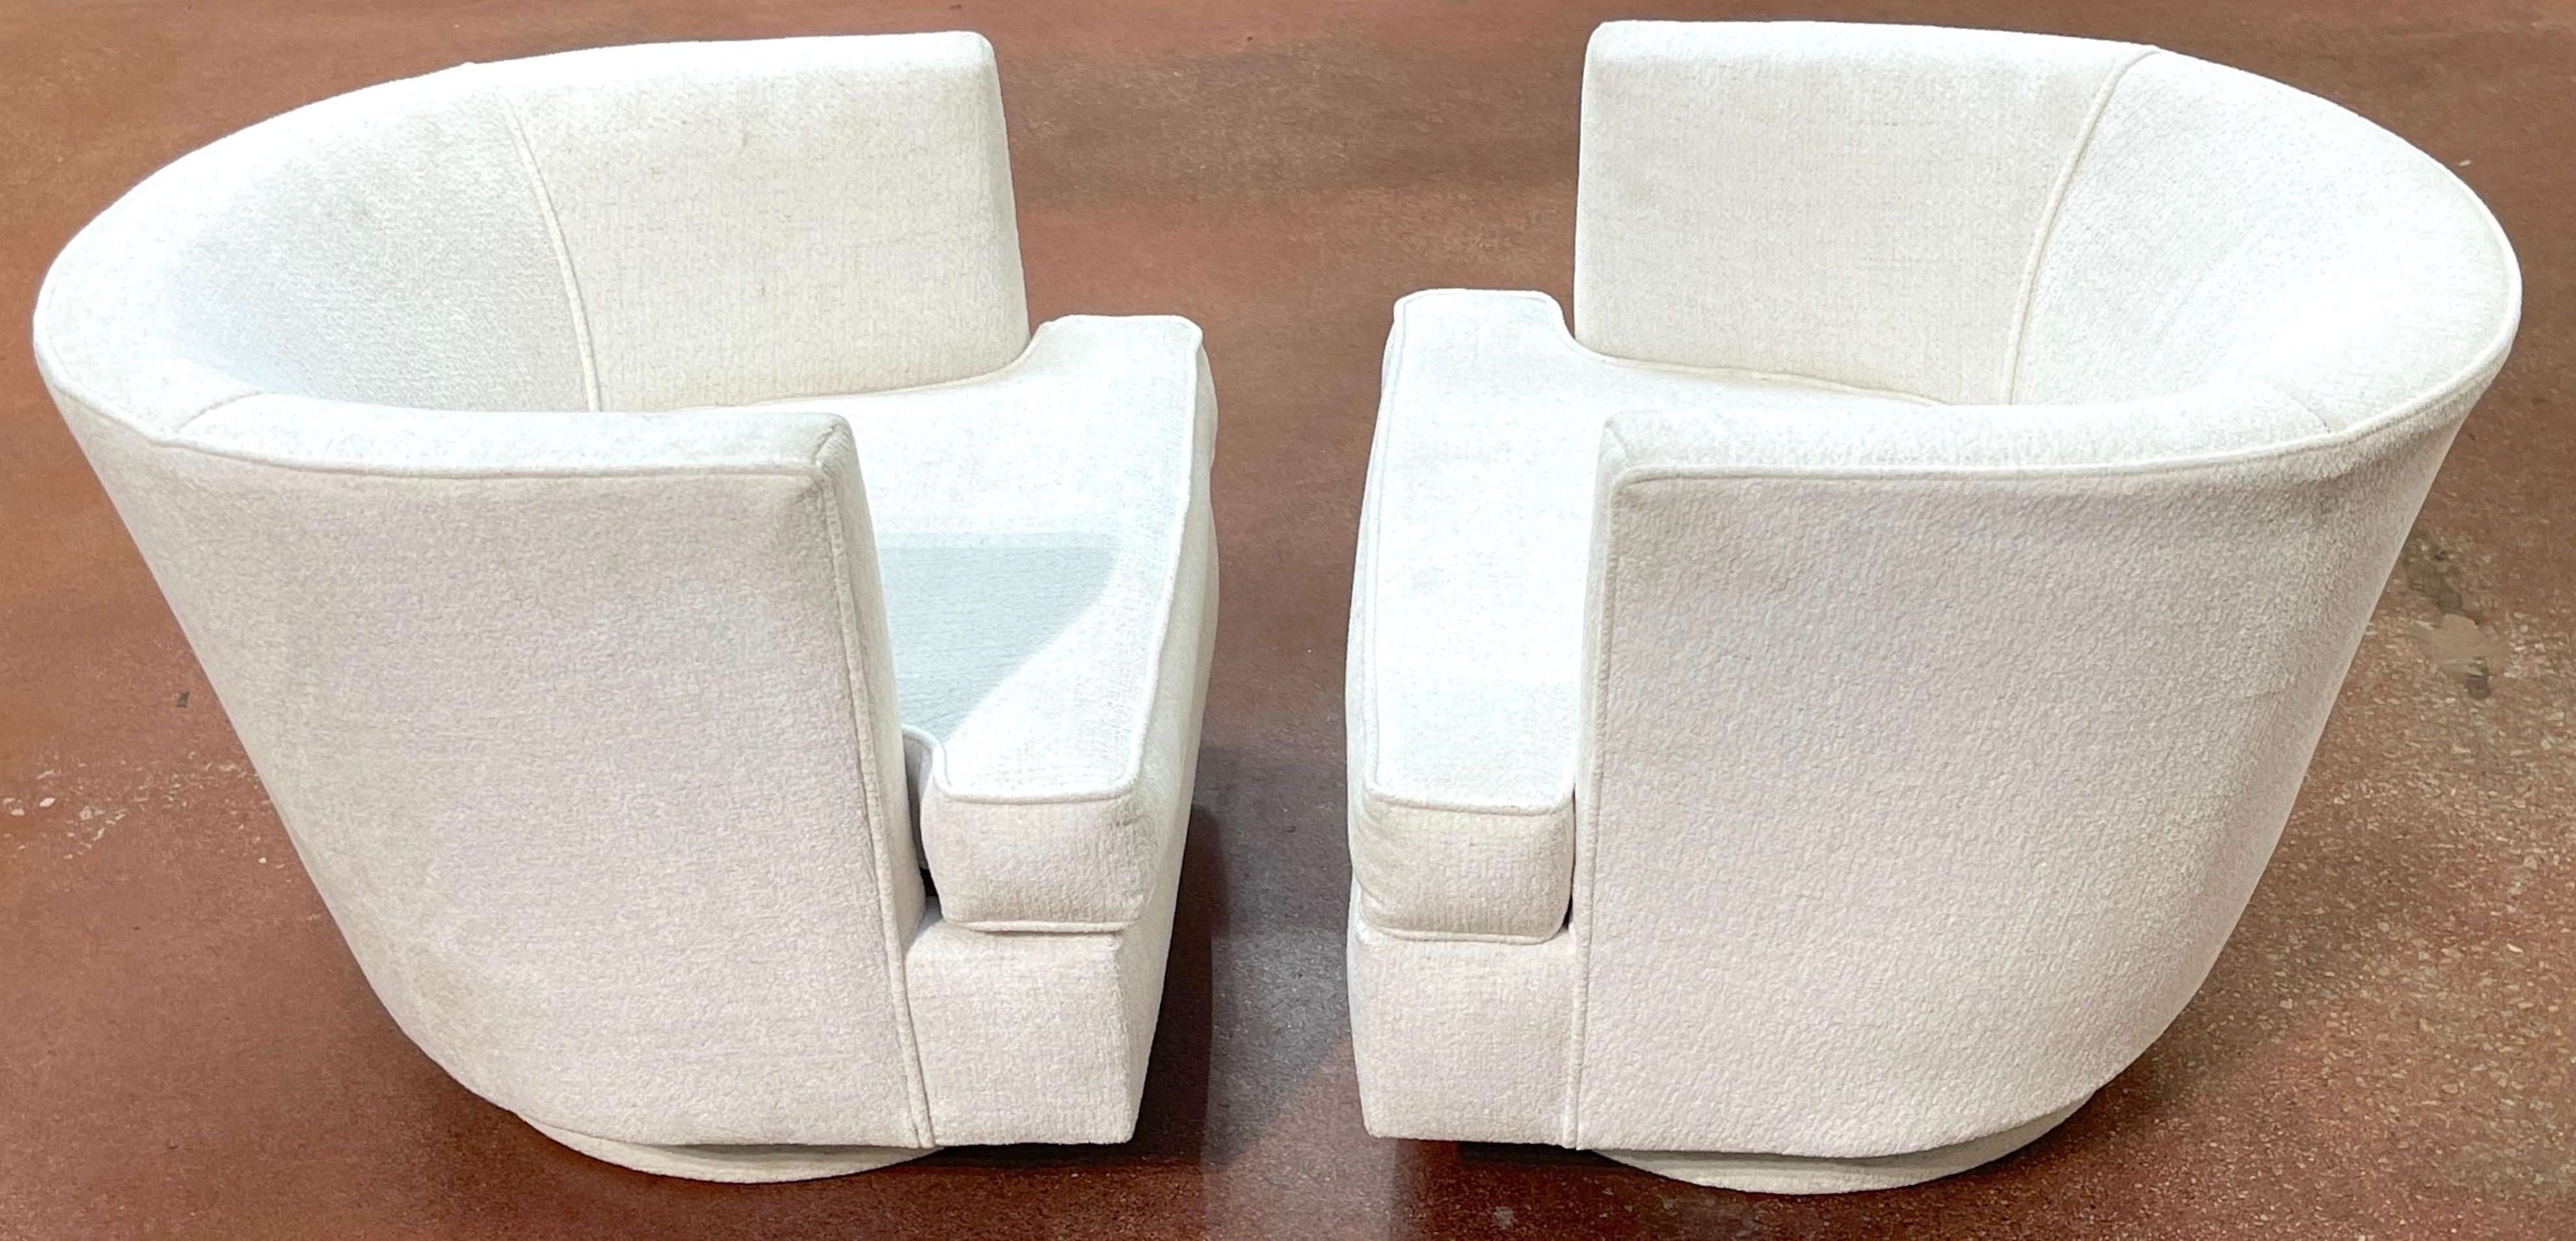 Pair of Sleek Mid-Century Modern Swivel Chairs Kravet Boucle Fabric, C. 1970s In Good Condition For Sale In West Palm Beach, FL